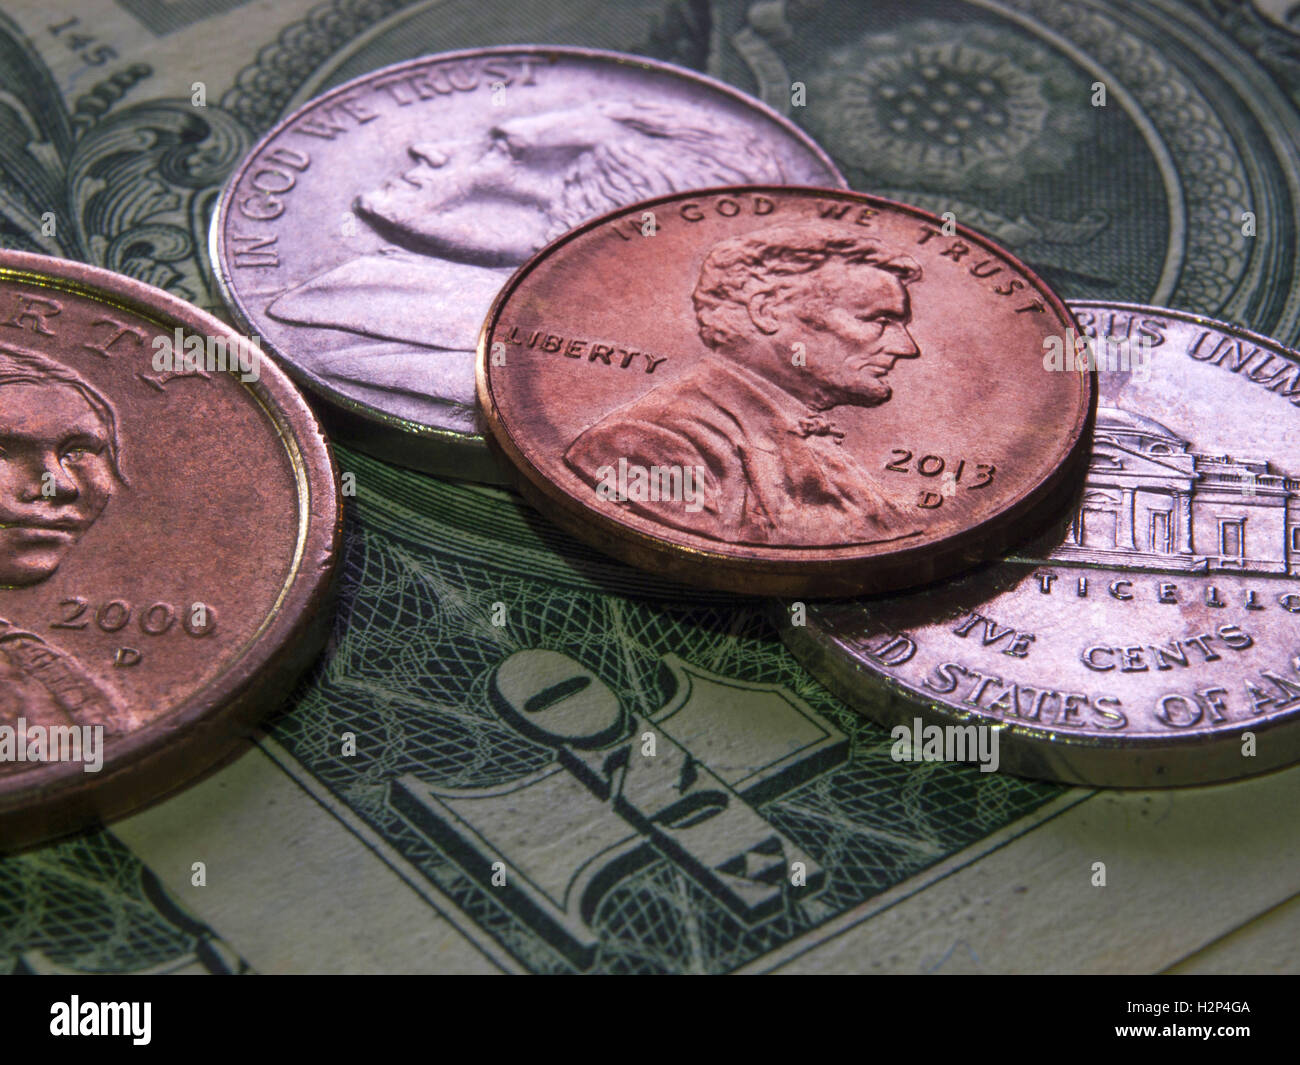 Coins and currency notes Stock Photo